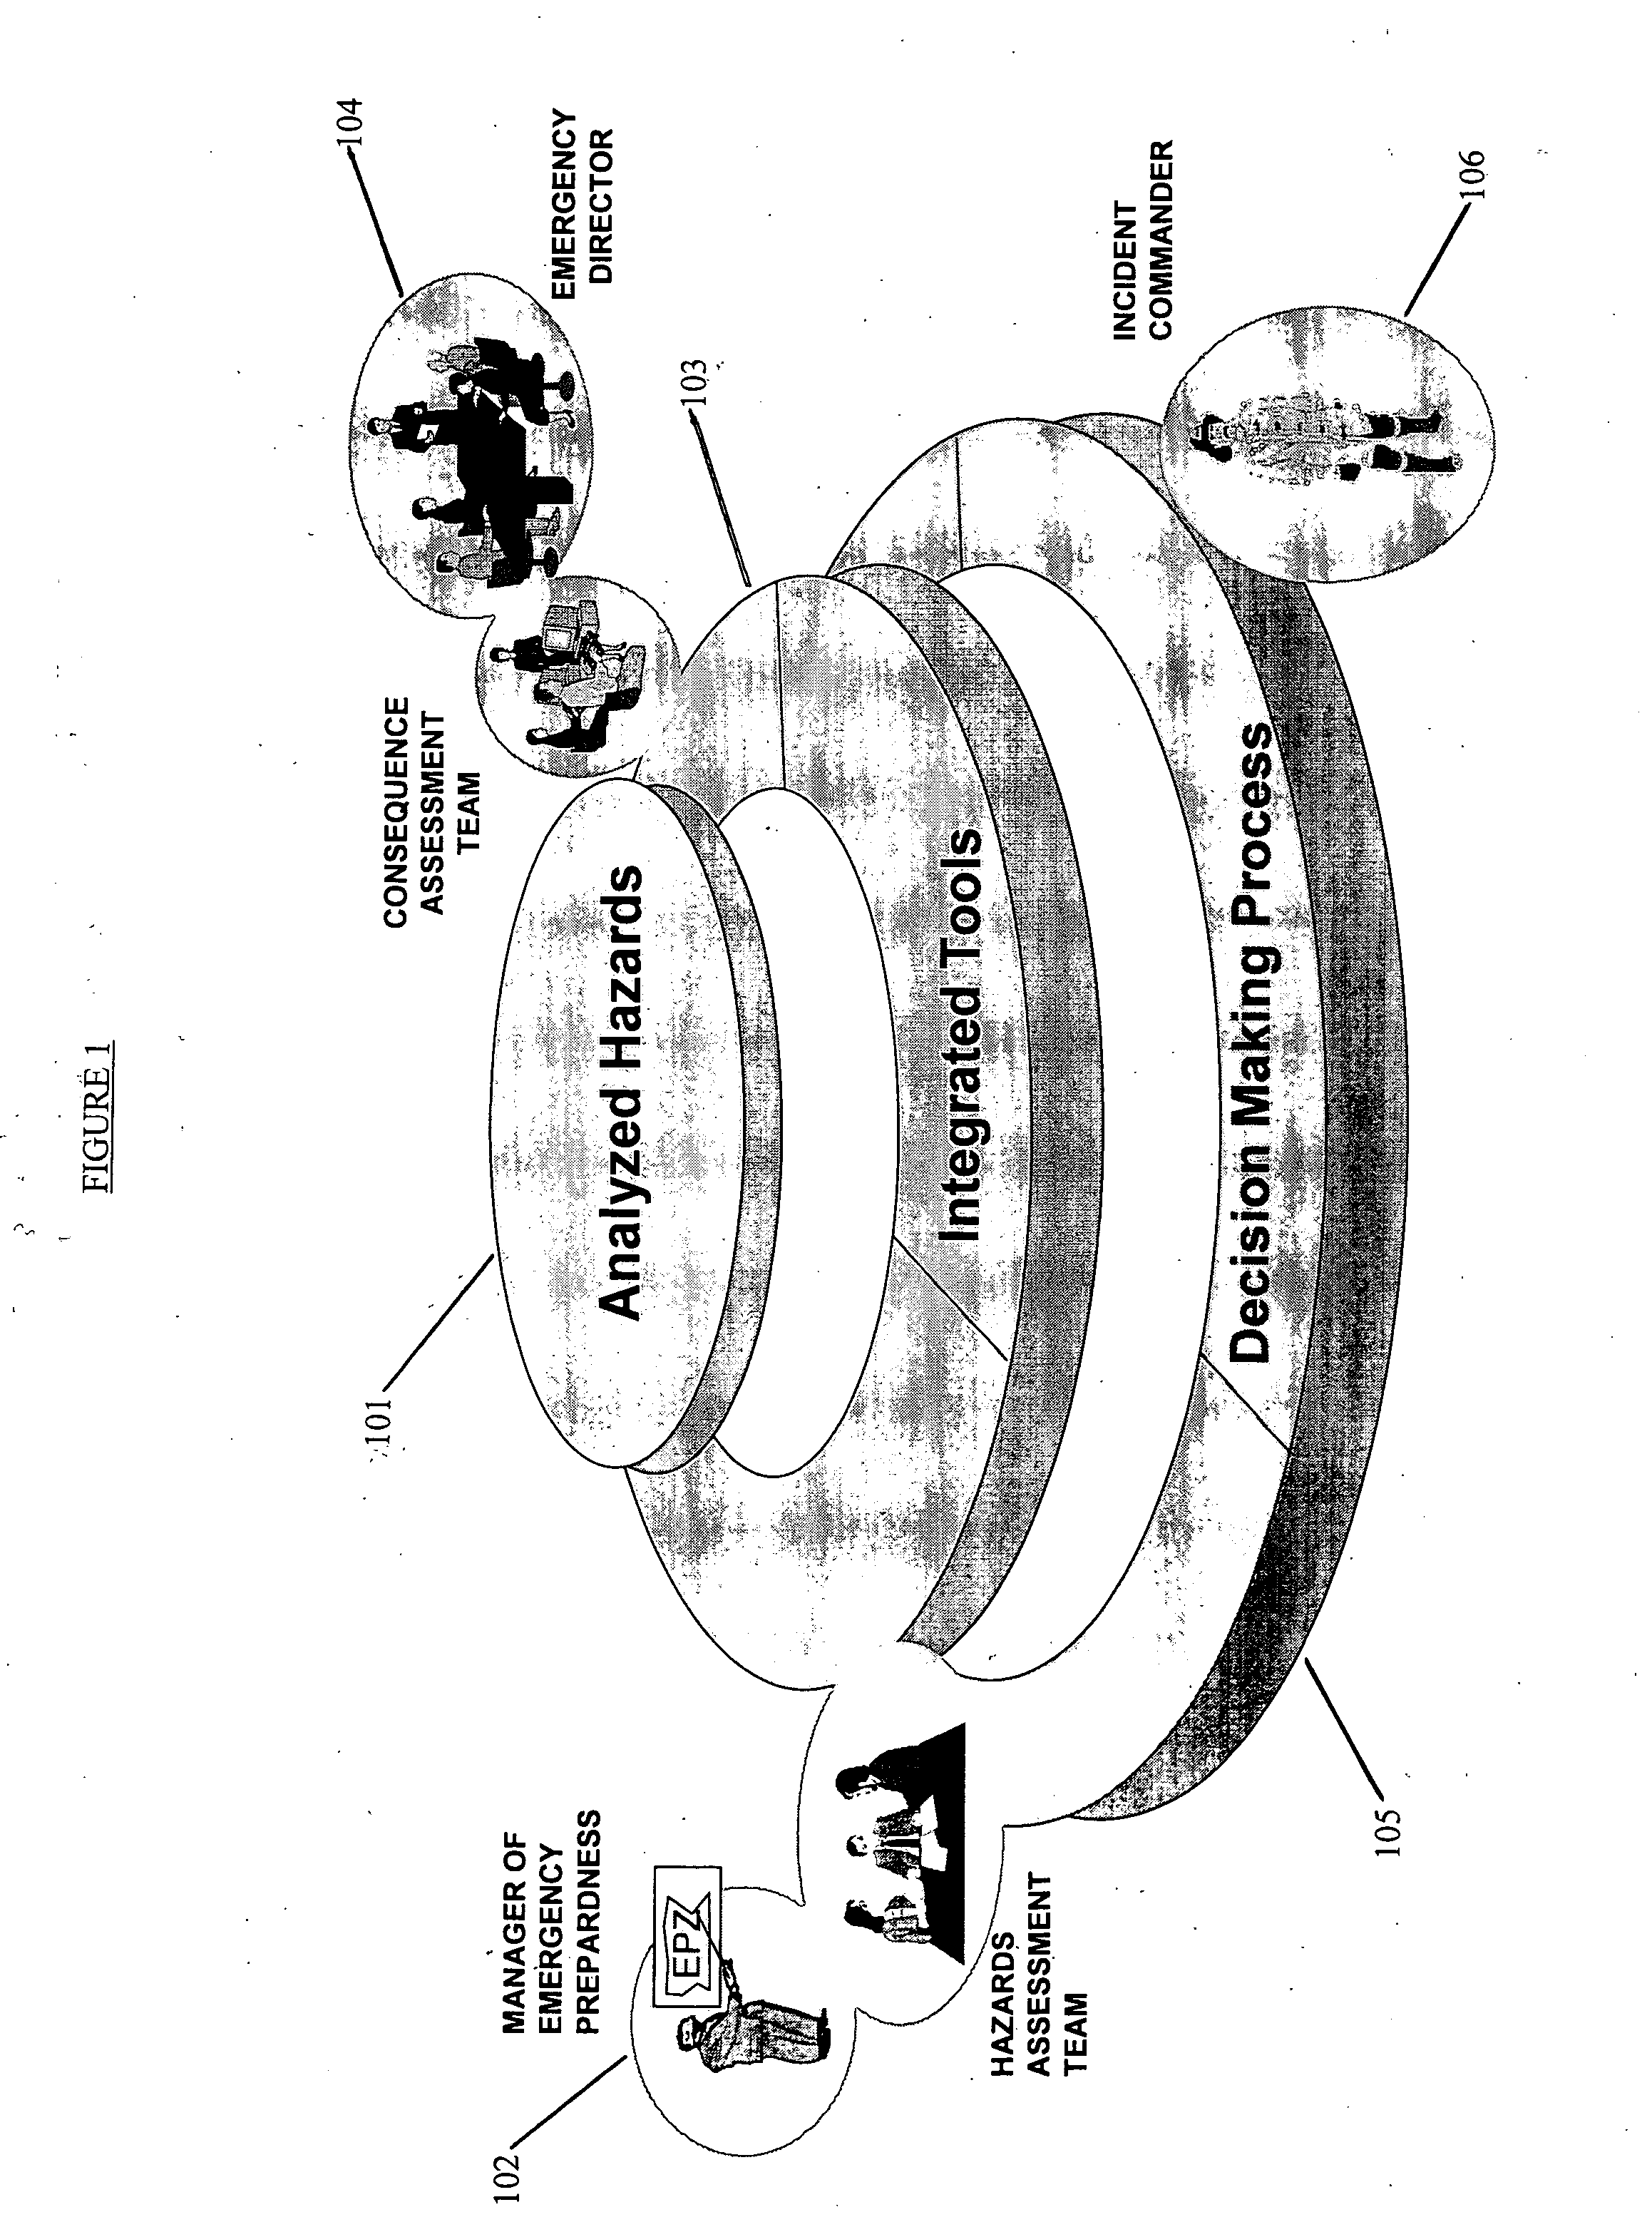 System and method for integrating hazard-based decision making tools and processes